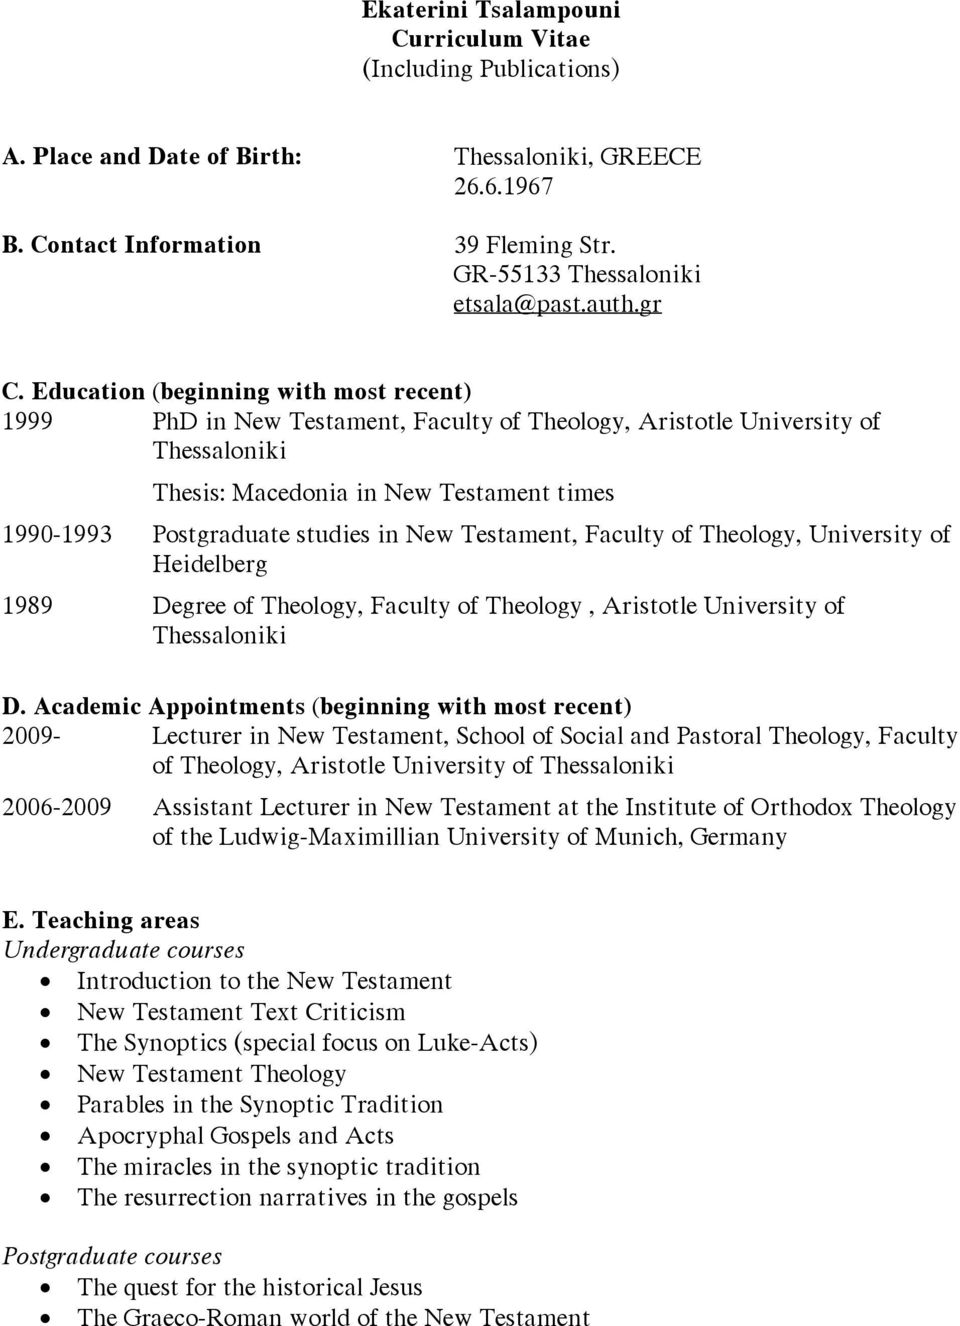 Education (beginning with most recent) 1999 PhD in New Testament, Faculty of Theology, Aristotle University of Thessaloniki Thesis: Macedonia in New Testament times 1990-1993 Postgraduate studies in